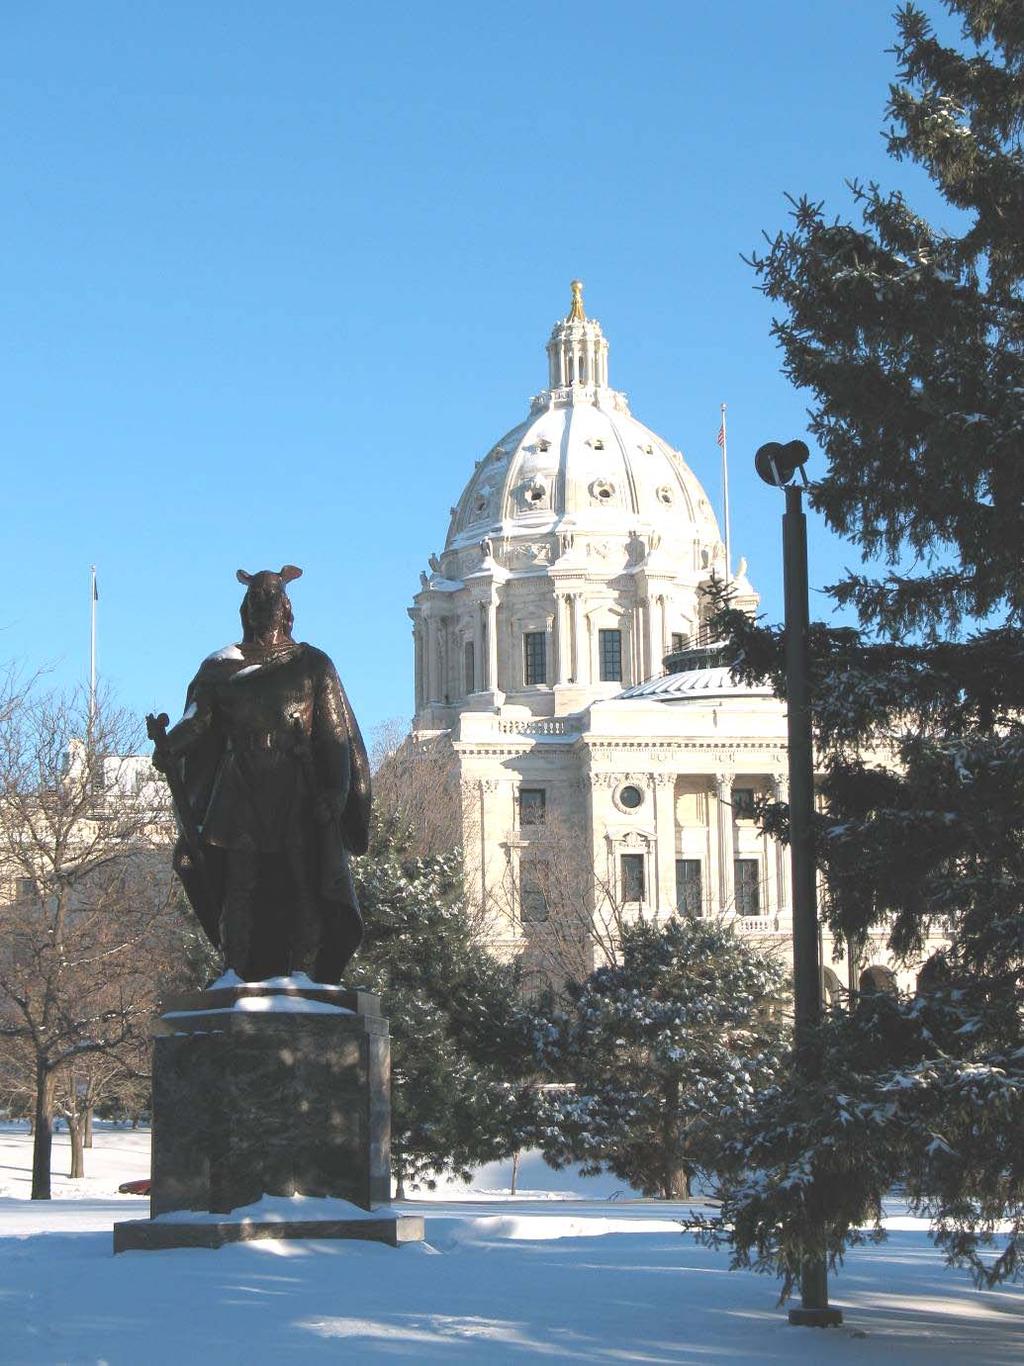 Leif Erikson monument, looking east toward State Capitol, December 2007.